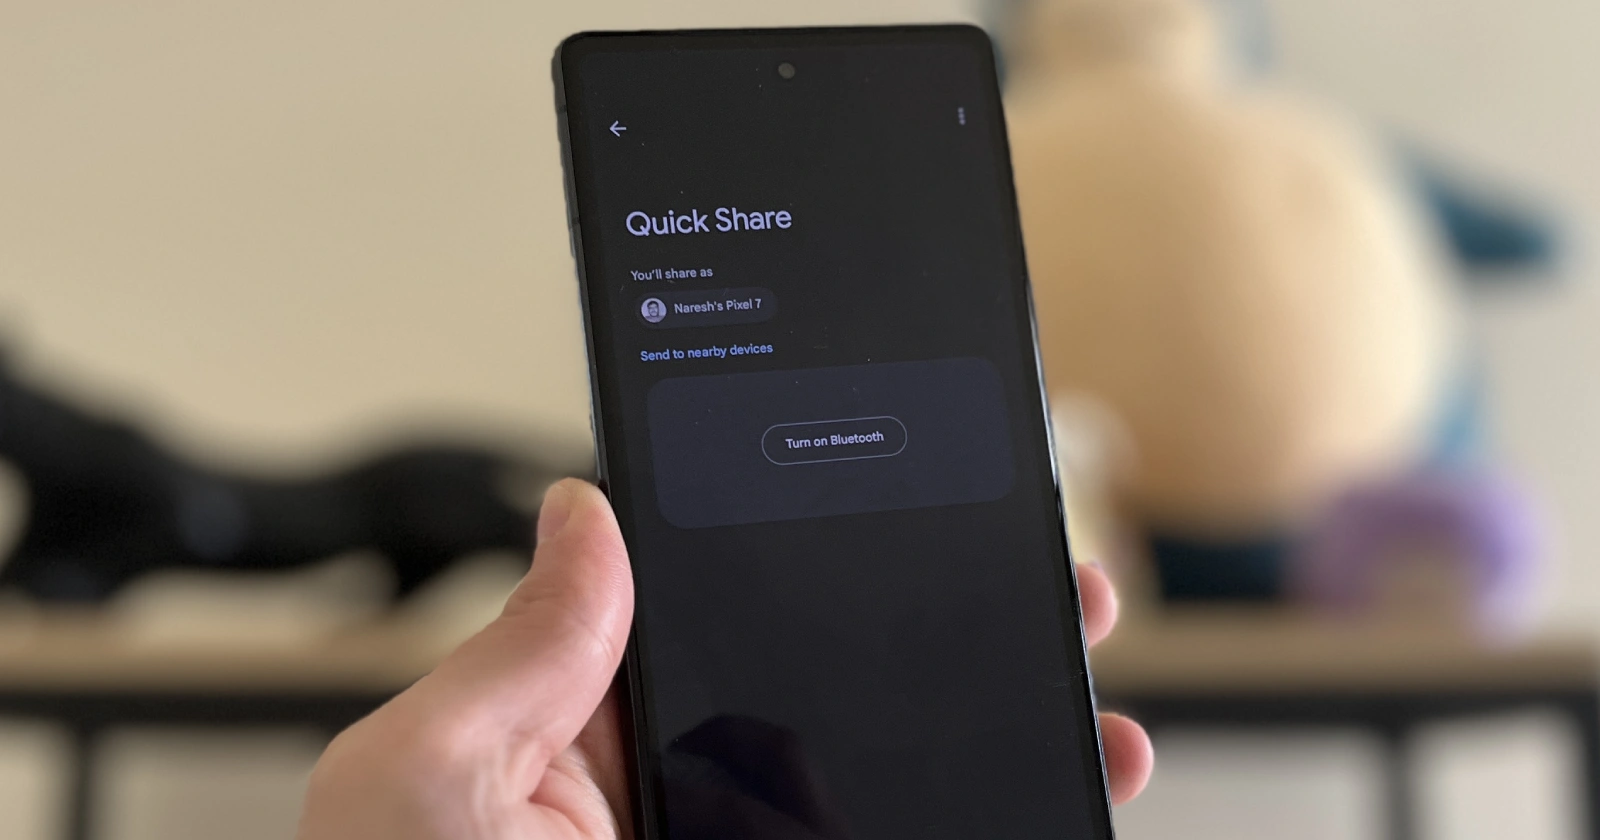 Google Pixel's Quick Share lets you select targets directly from share sheet